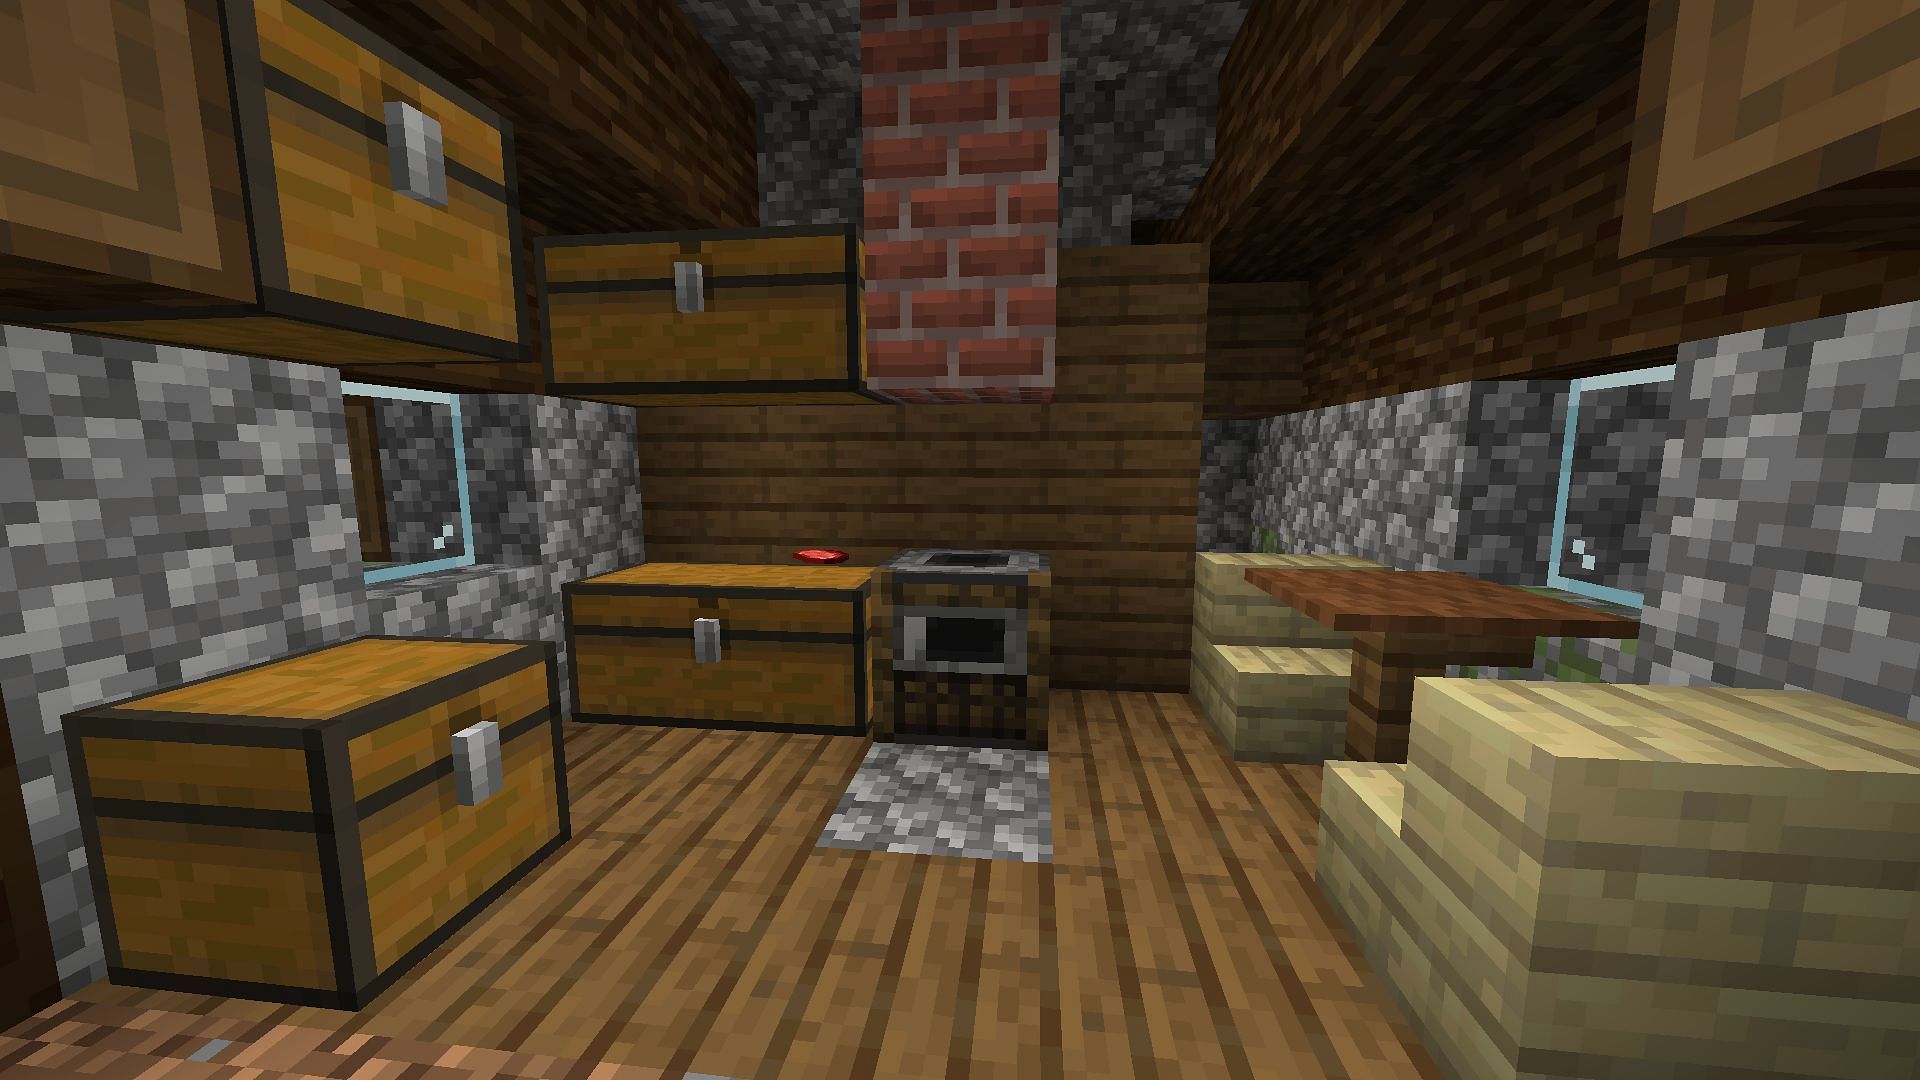 Some of the best design ideas for making a kitchen in Minecraft (Image via Mojang)